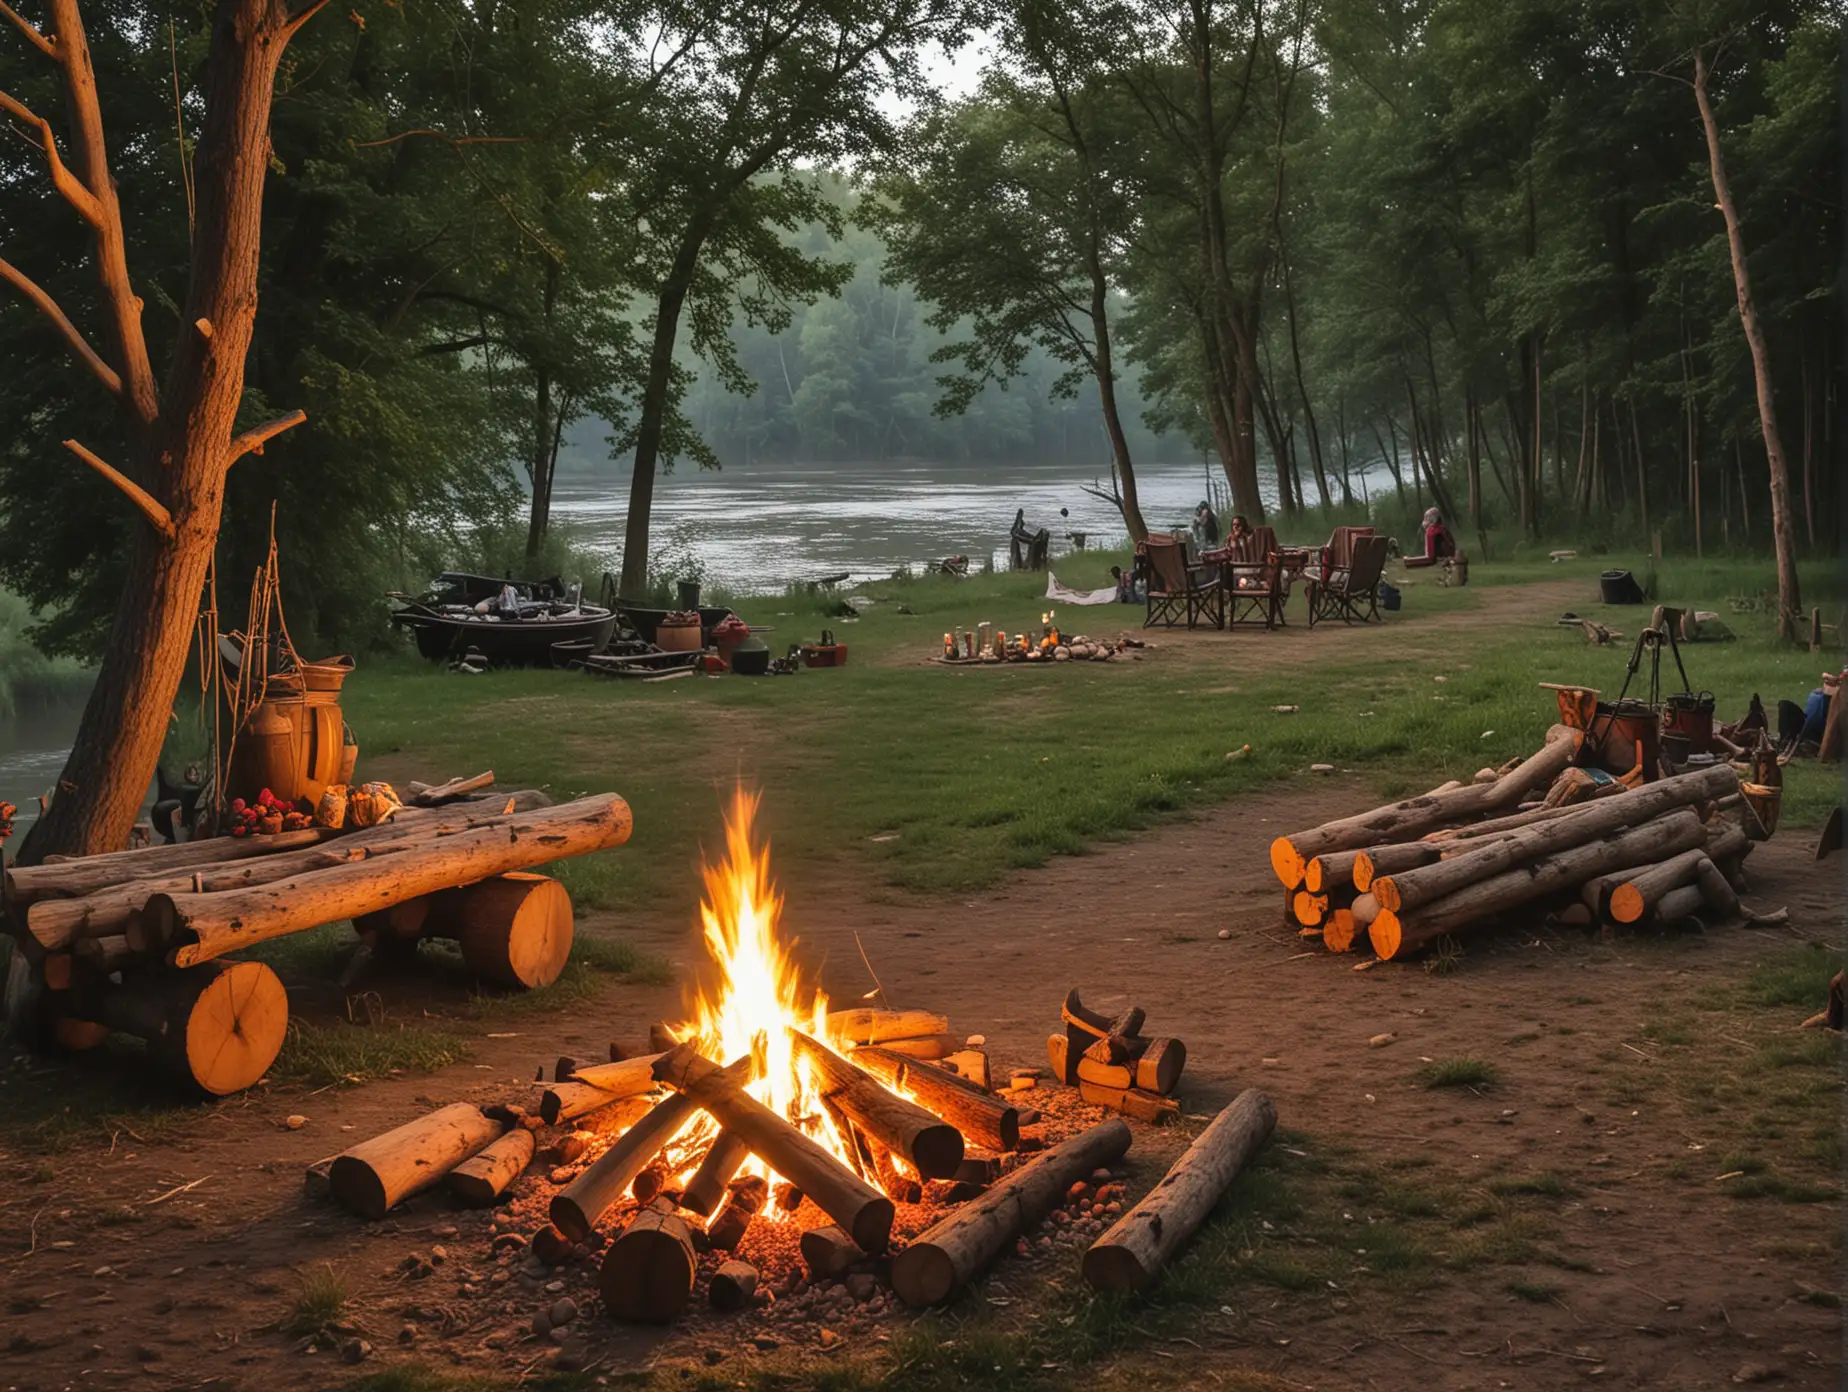 gypsy themed riverside camp with fire on logs early evening summer


